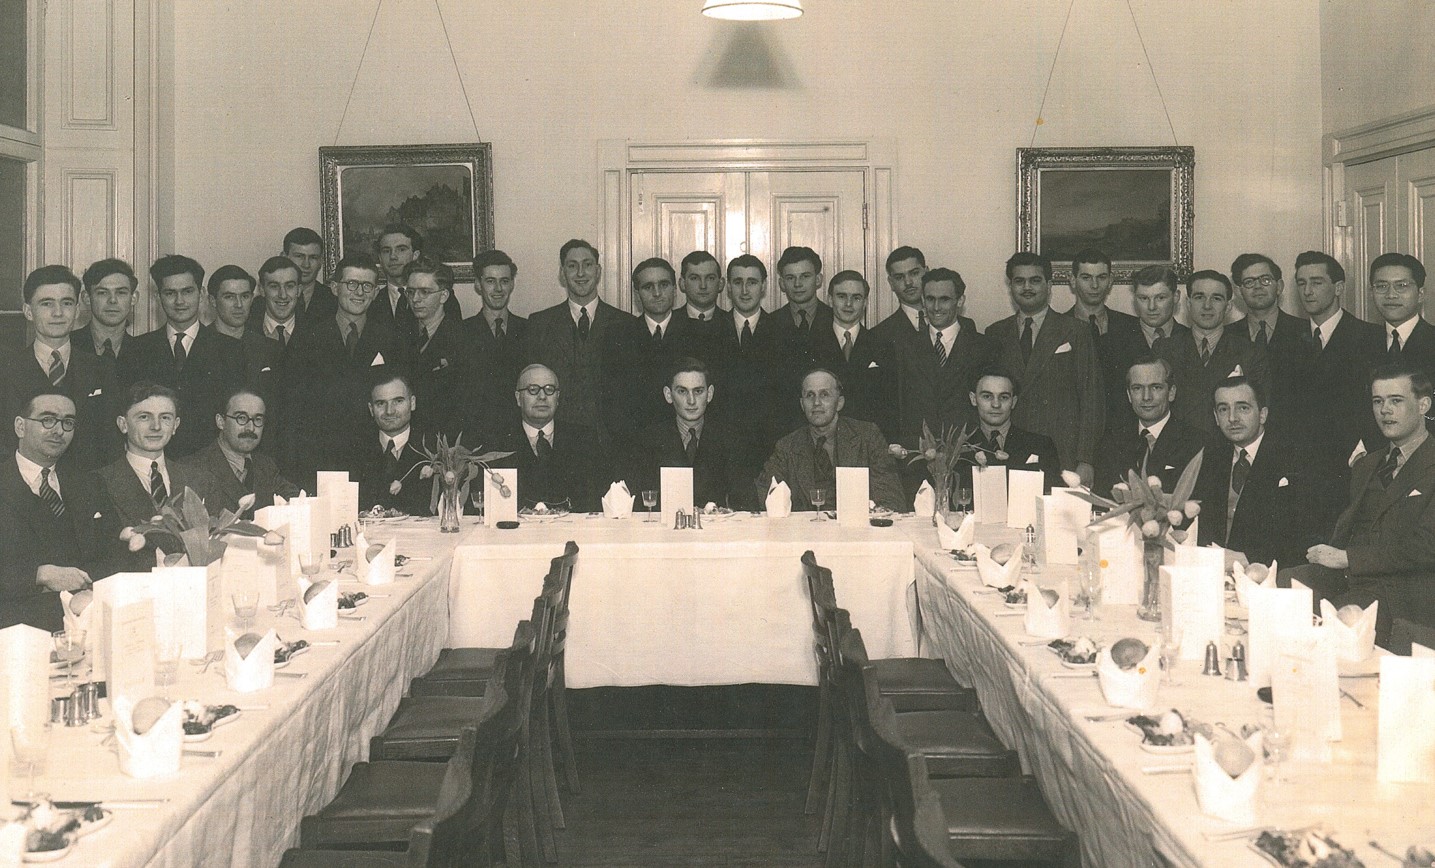 Photograph of the Cranworth Law Society dinner, 1949